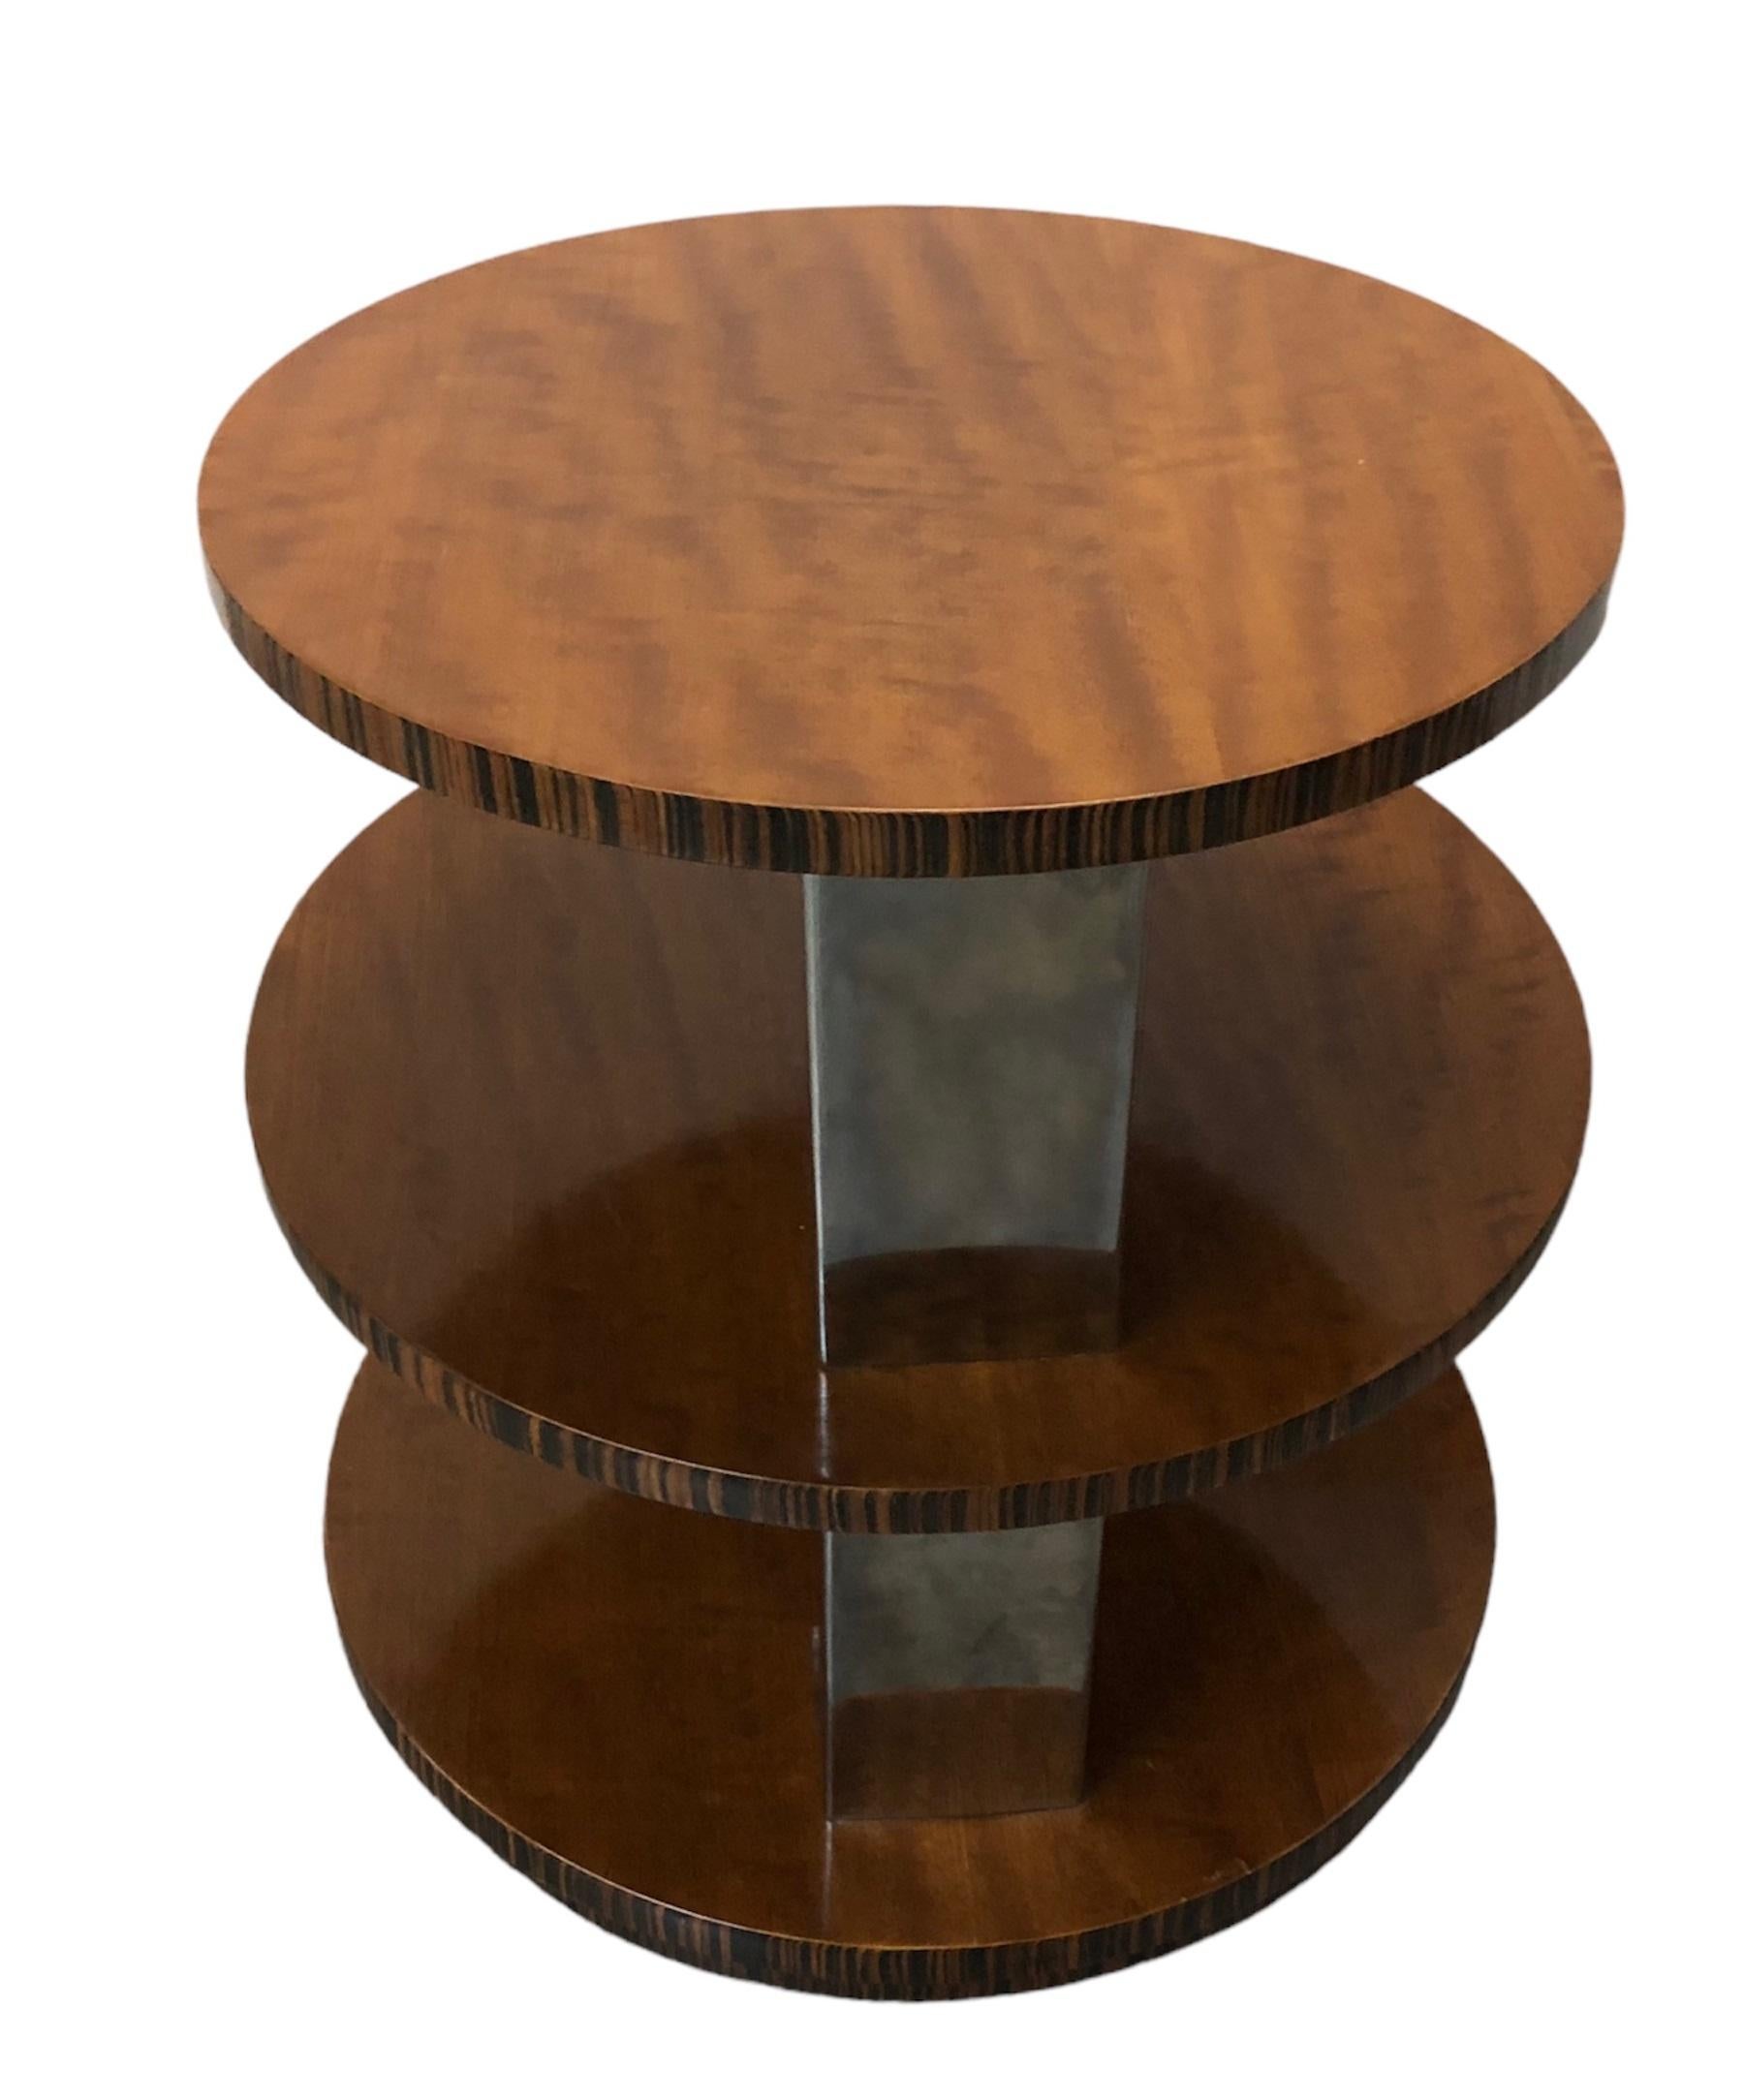 Three Tier Table 'Attributed to the Bauhaus' German For Sale 12